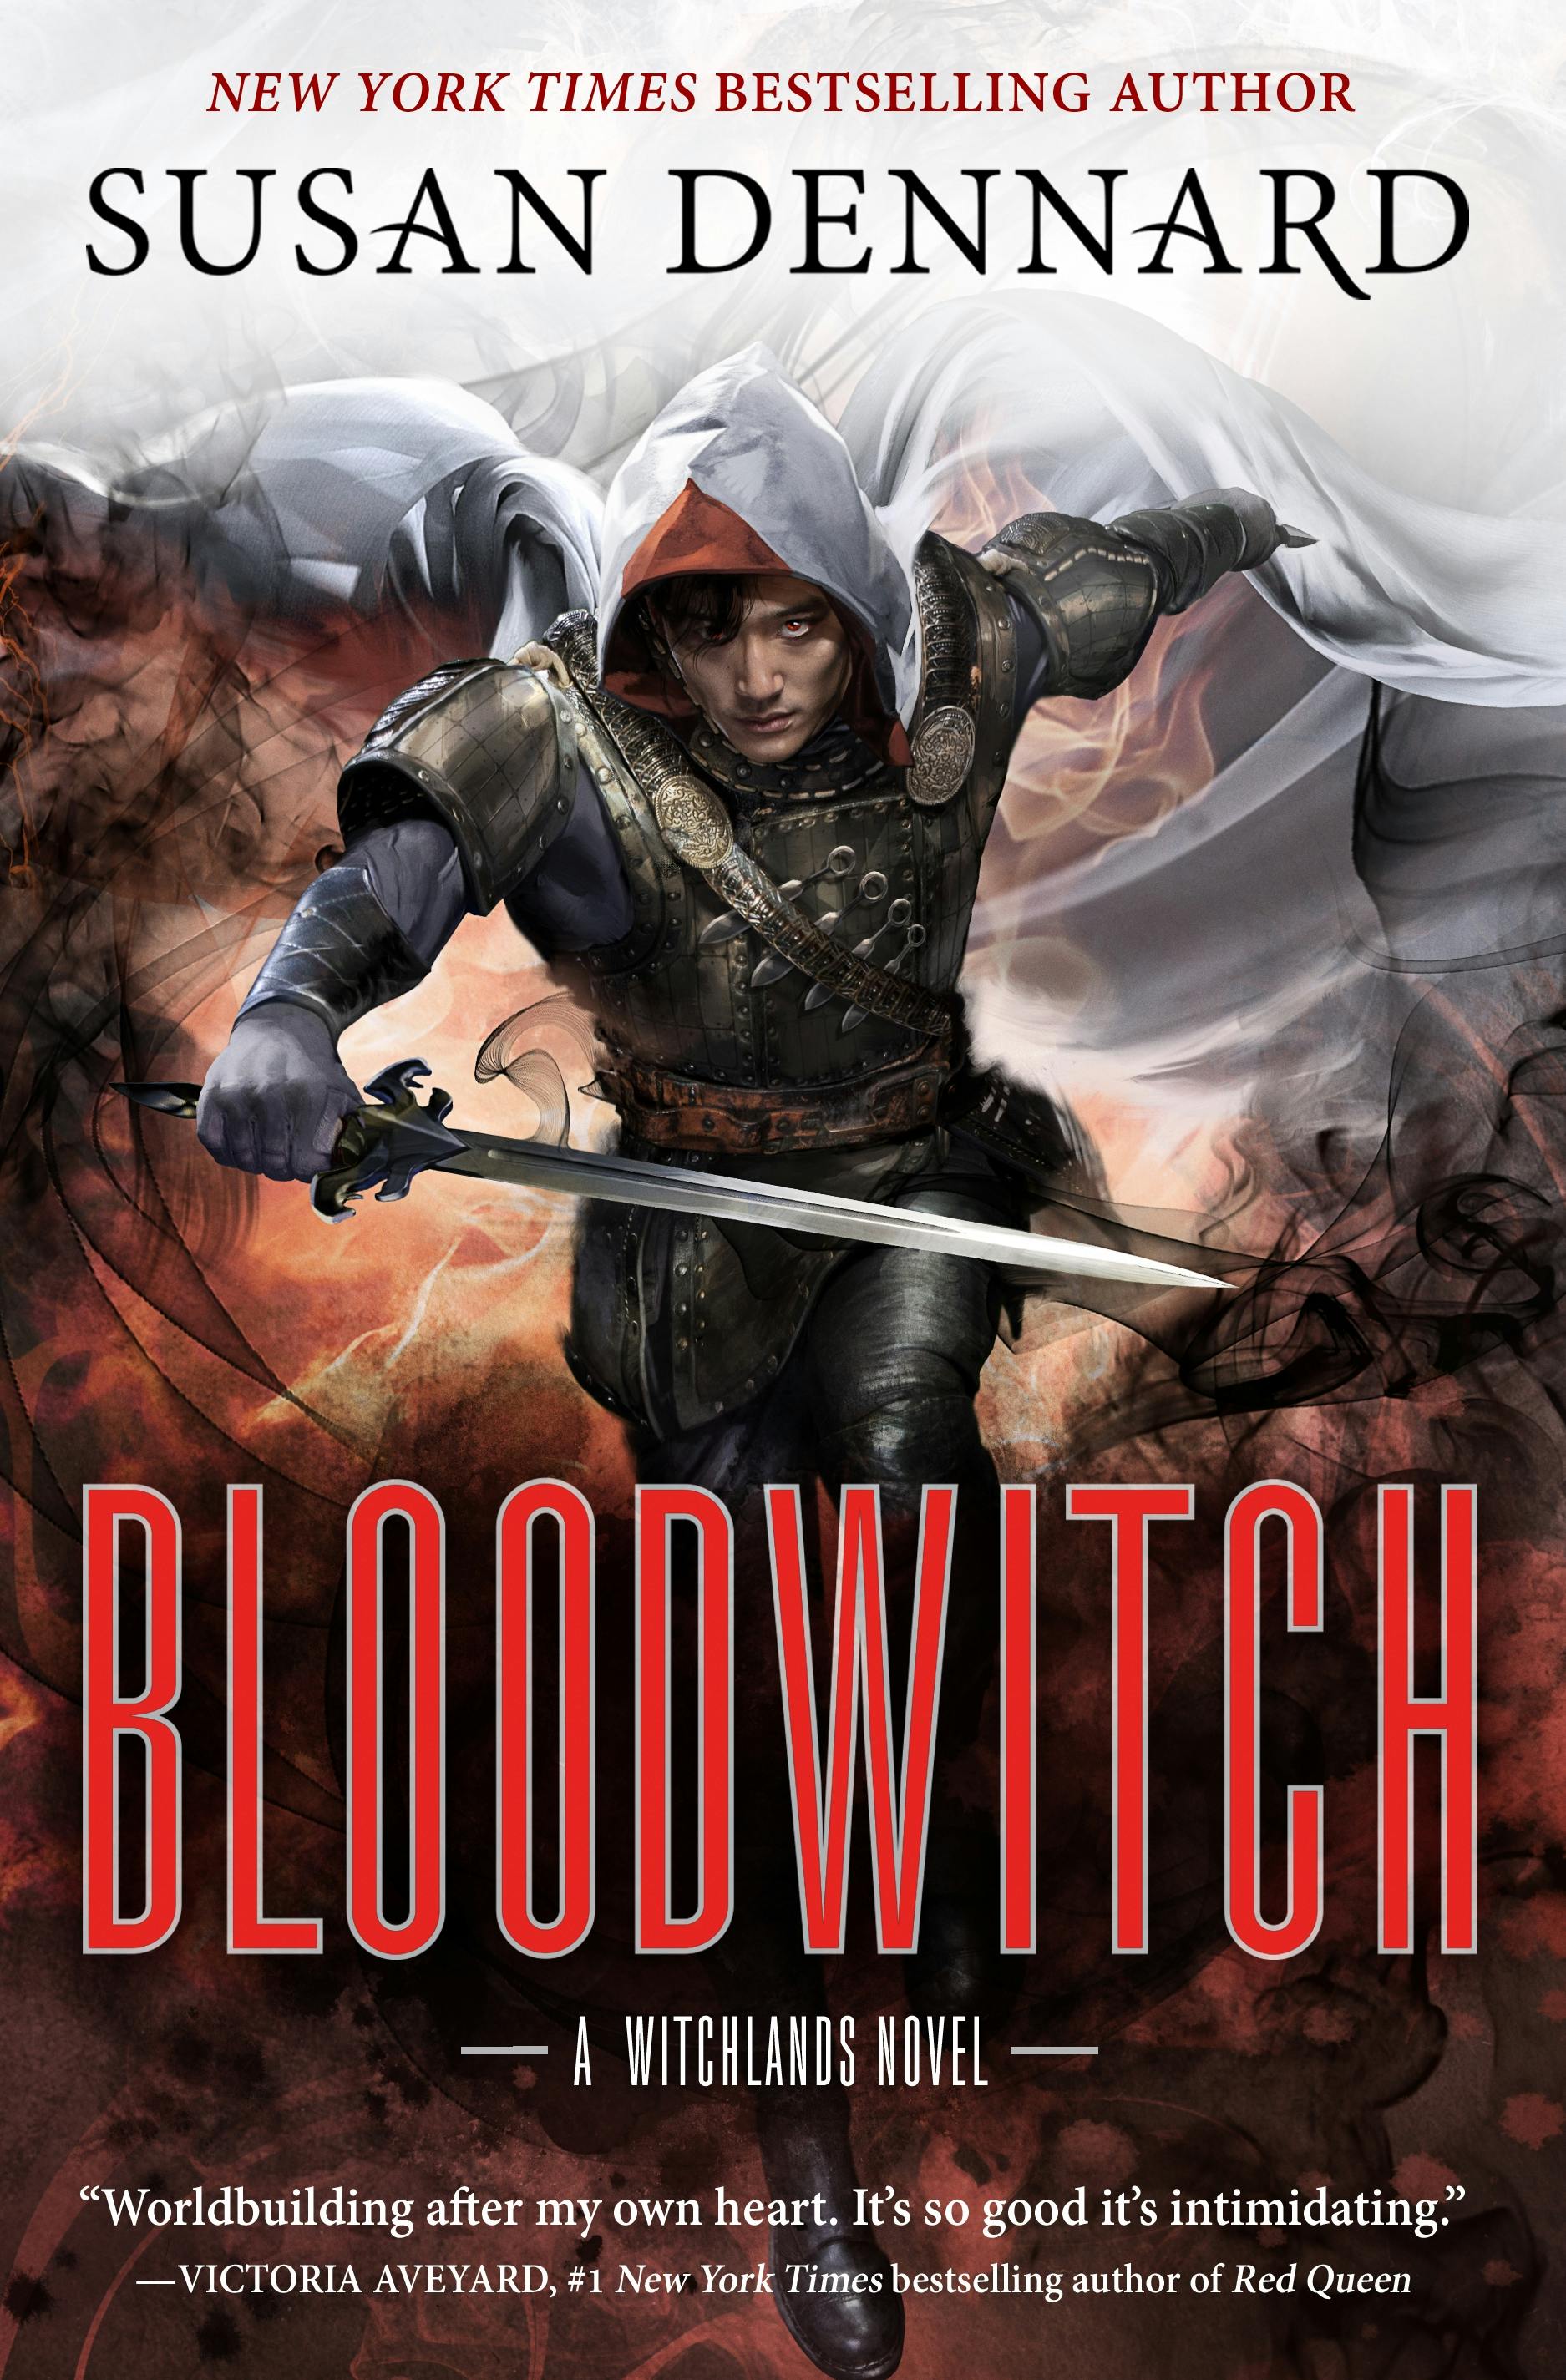 Cover for the book titled as: Bloodwitch